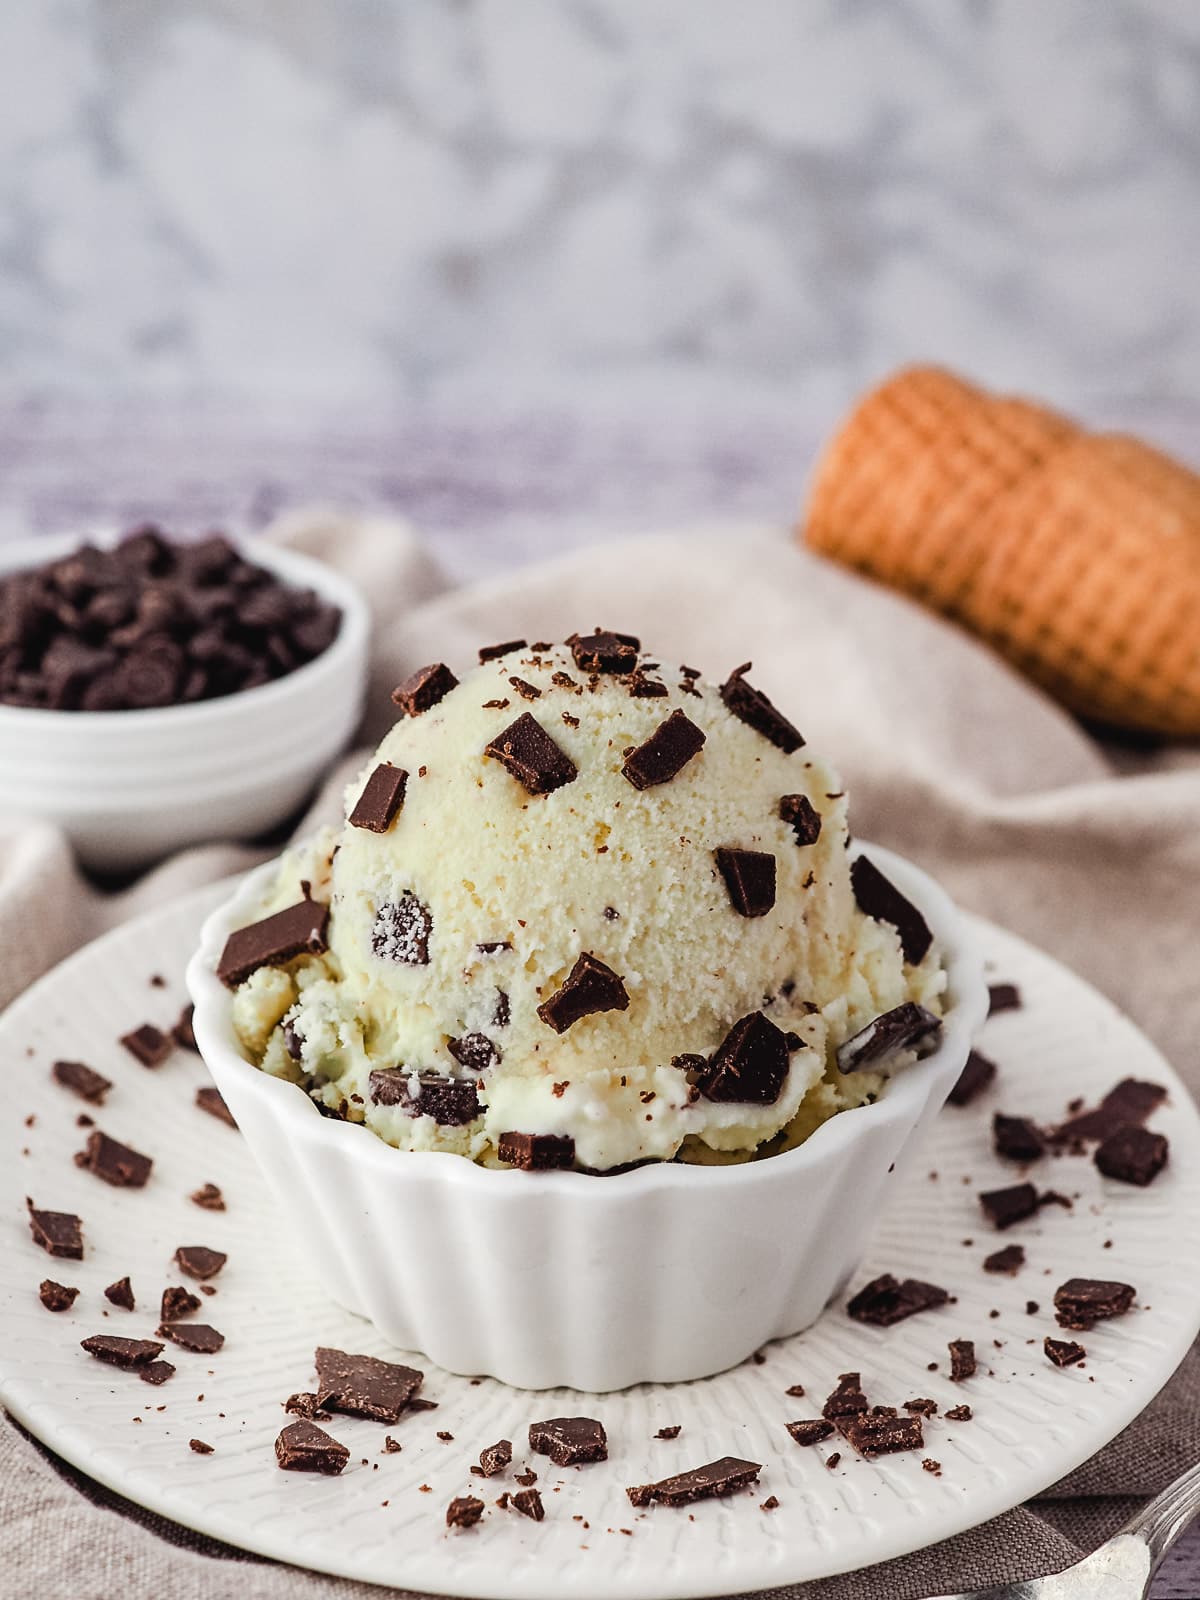 Scoop of ice cream in a bowl sprinkled with extra chocolate chips, and ice cream cones and bowl of choc chips in the background.